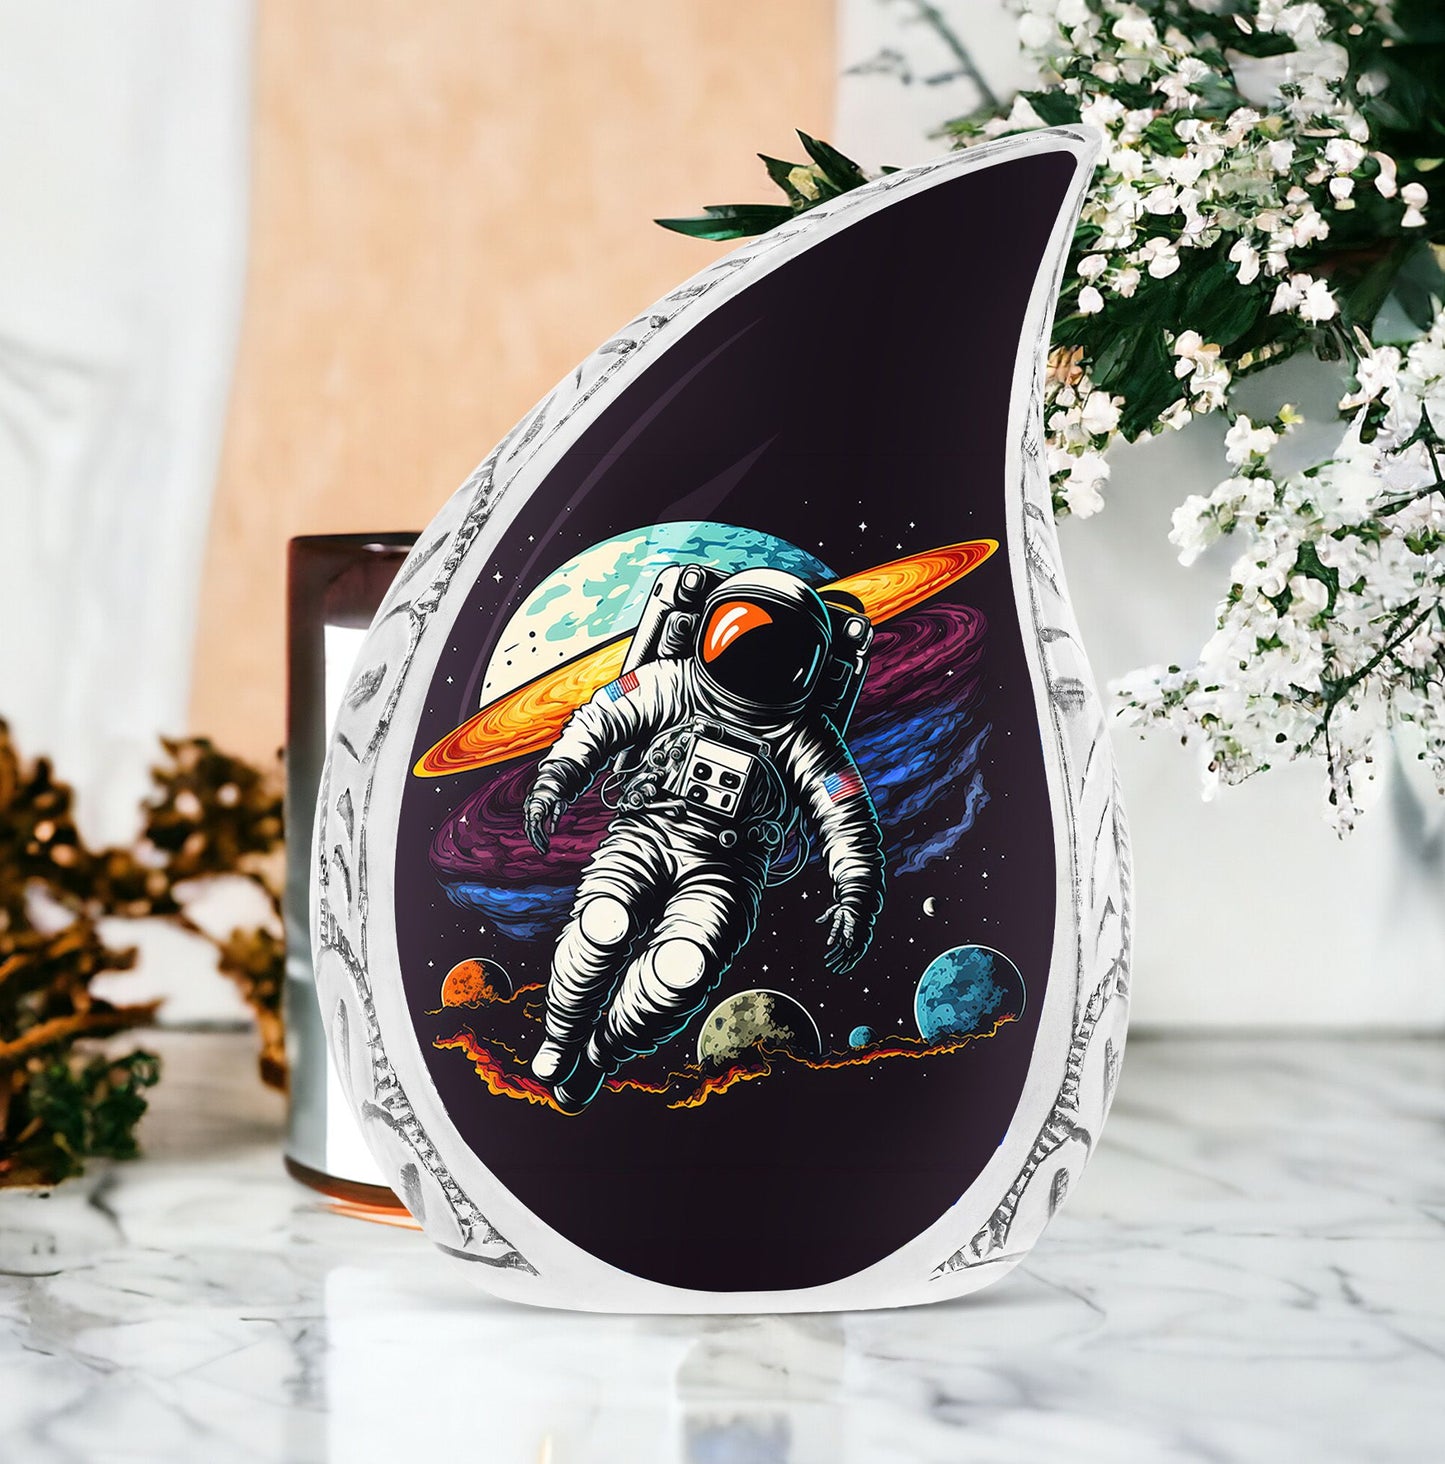 Decorative large urn with astronaut space illustration, suitable for human ashes